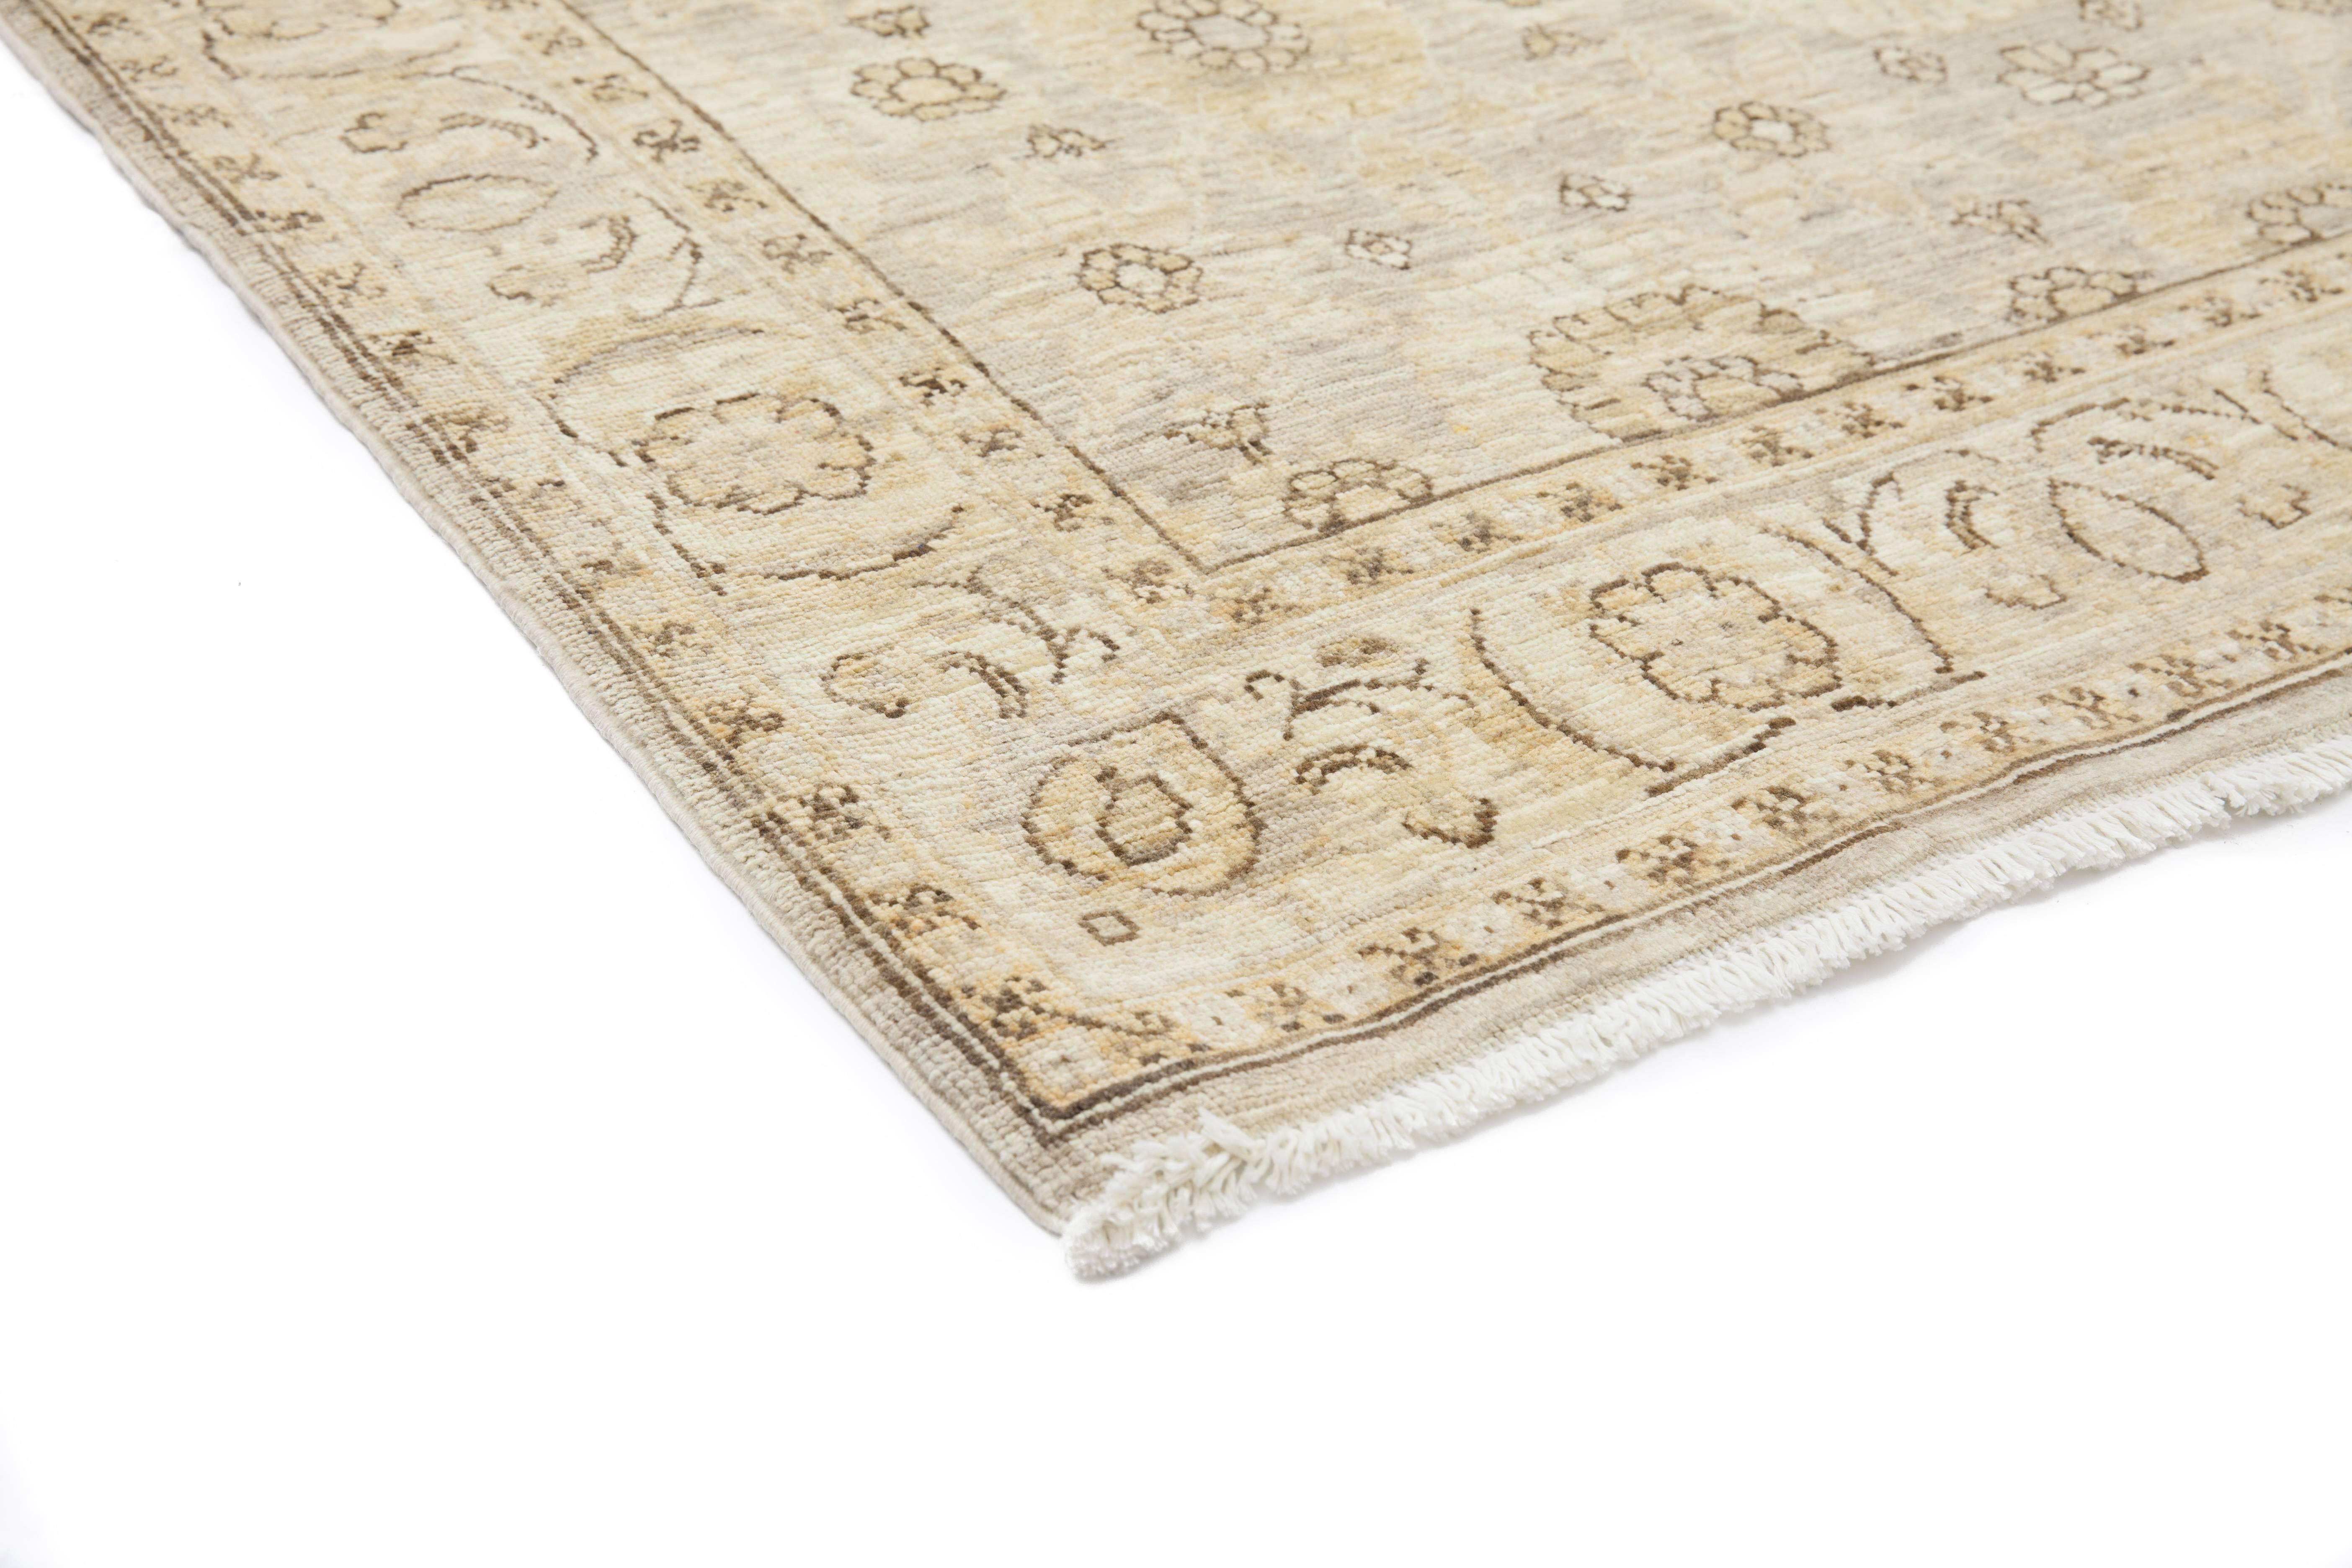 Color: Beige - Made In: Pakistan. 100% Wool. Originating centuries ago in what is now Turkey, Oushak rugs have long been sought after for their intricate patterns, lush yet subtle colors, and soft luster. These rugs continue that tradition.